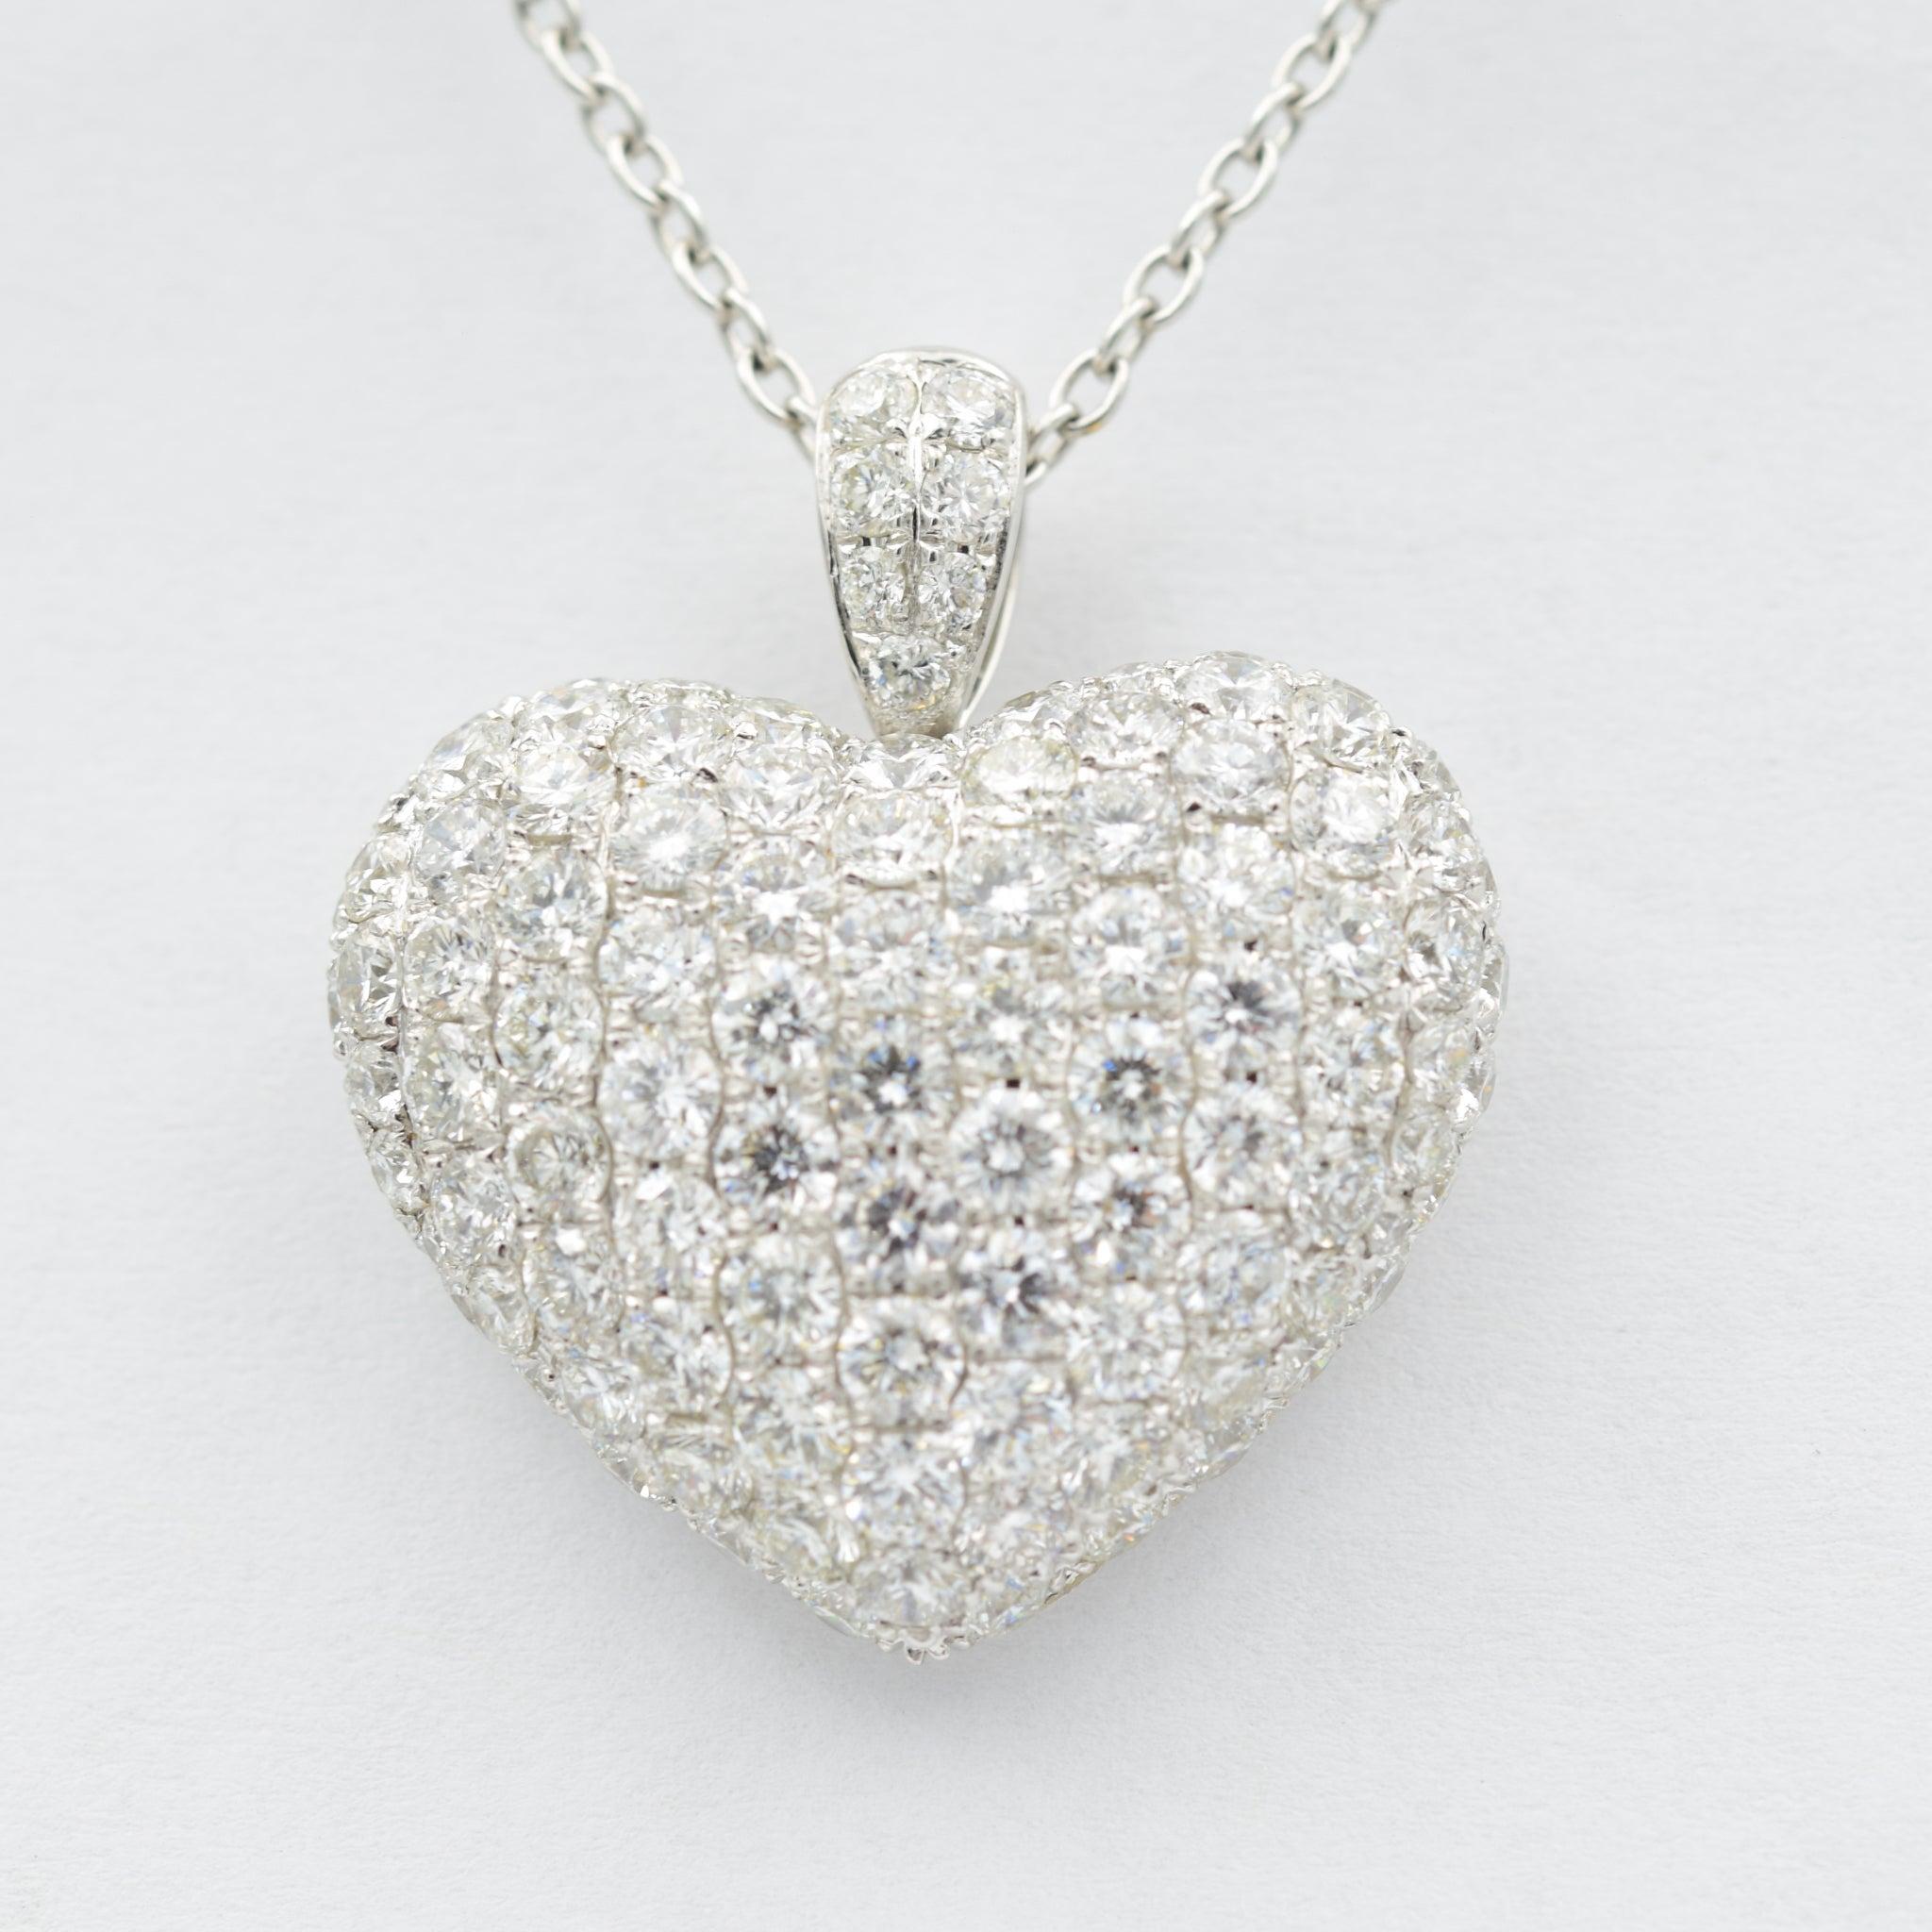 This beautiful diamond heart pendant by Odelia adds a little glamour to any outfit. It is crafted in 18k White Gold and contains 4.21 carats of dazzling diamonds. It is on a standard 18